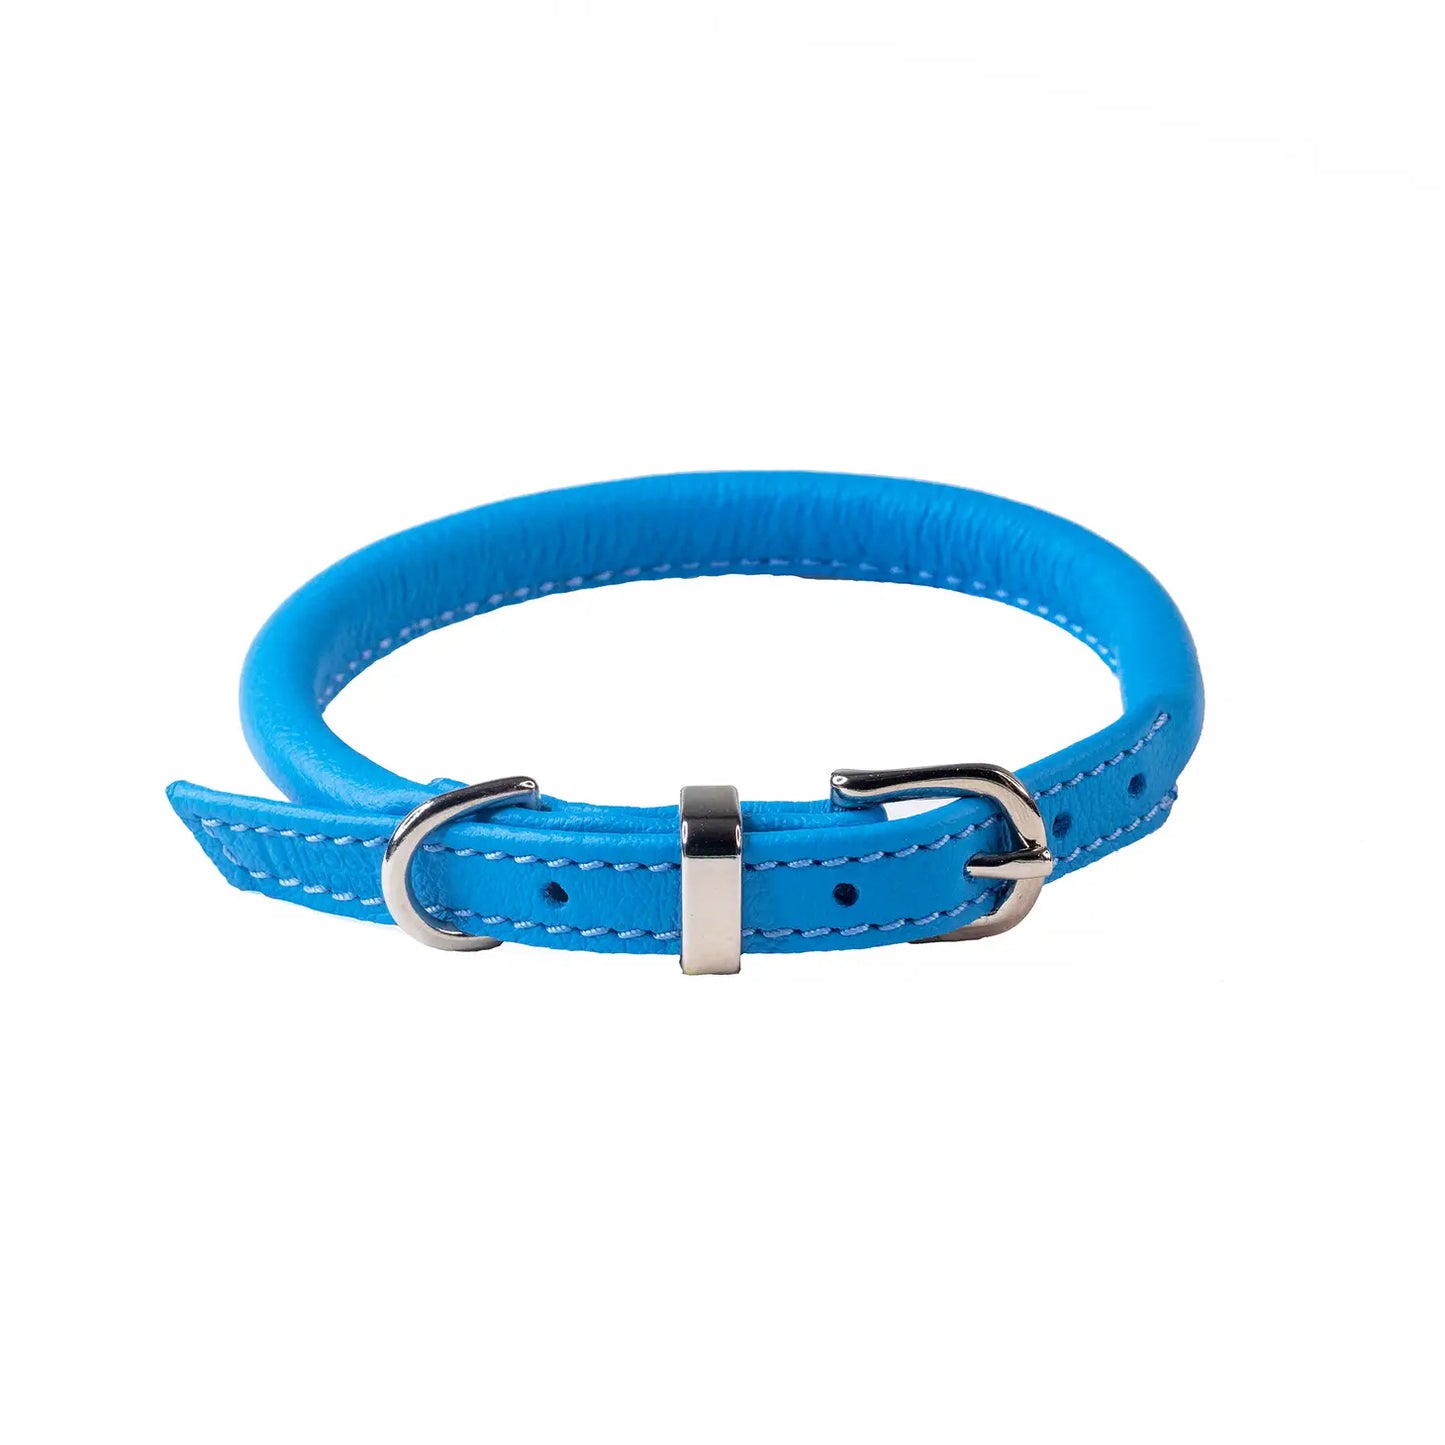 Dogs & Horses Rolled Soft Leather Collar Blue